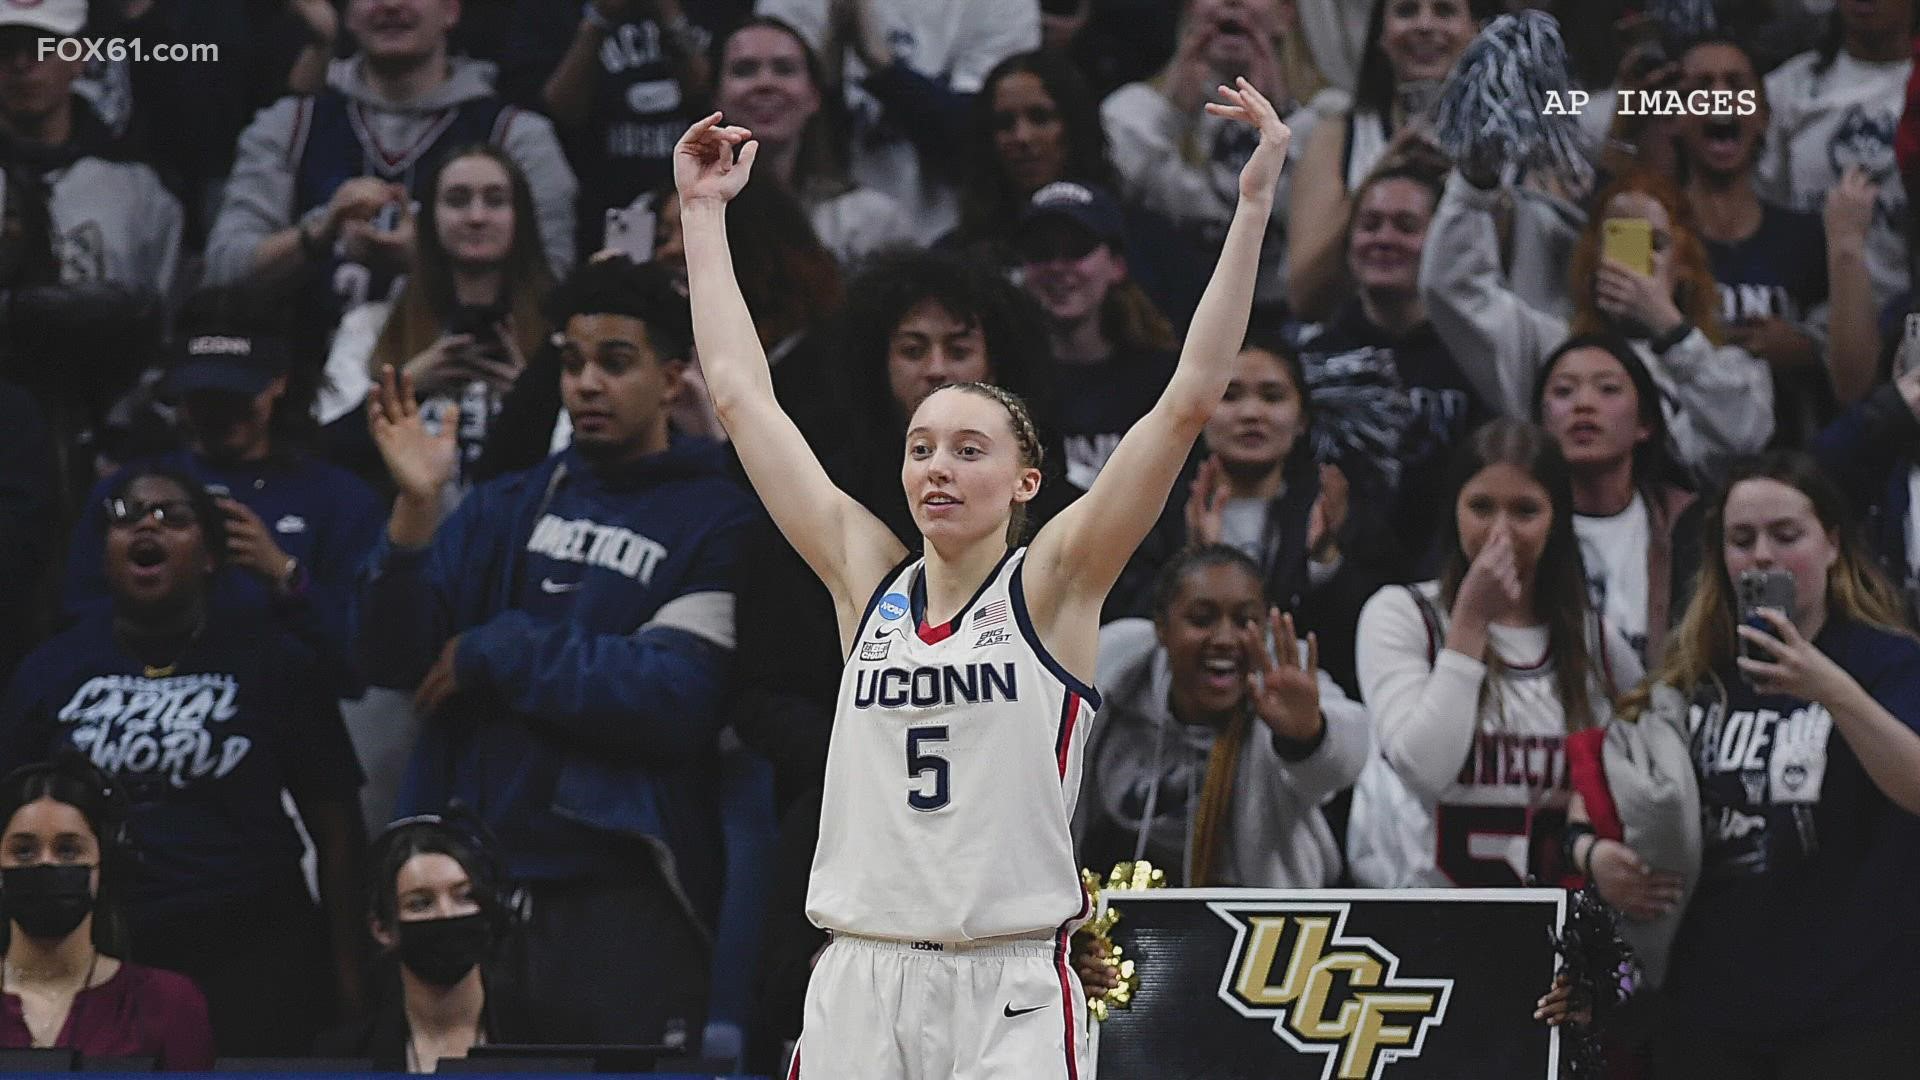 UConn is set to play against Indiana in Bridgeport on Saturday